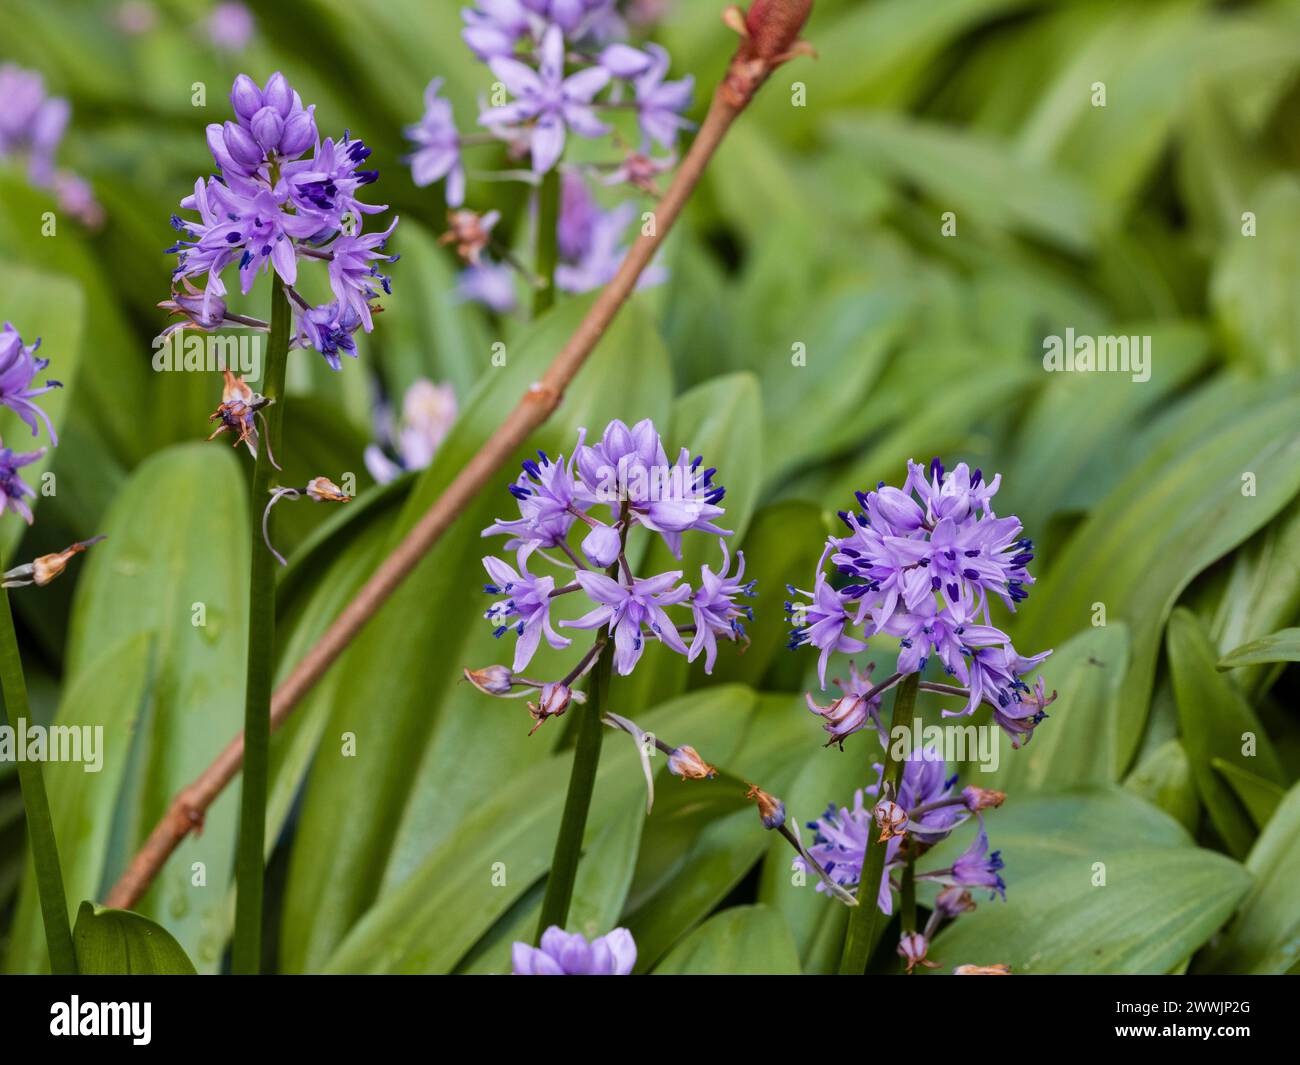 Early spring spikes of the lavender-blue flowers of the hardy Pyrenean squill bulb, Scilla lilio-hyacinthus Stock Photo